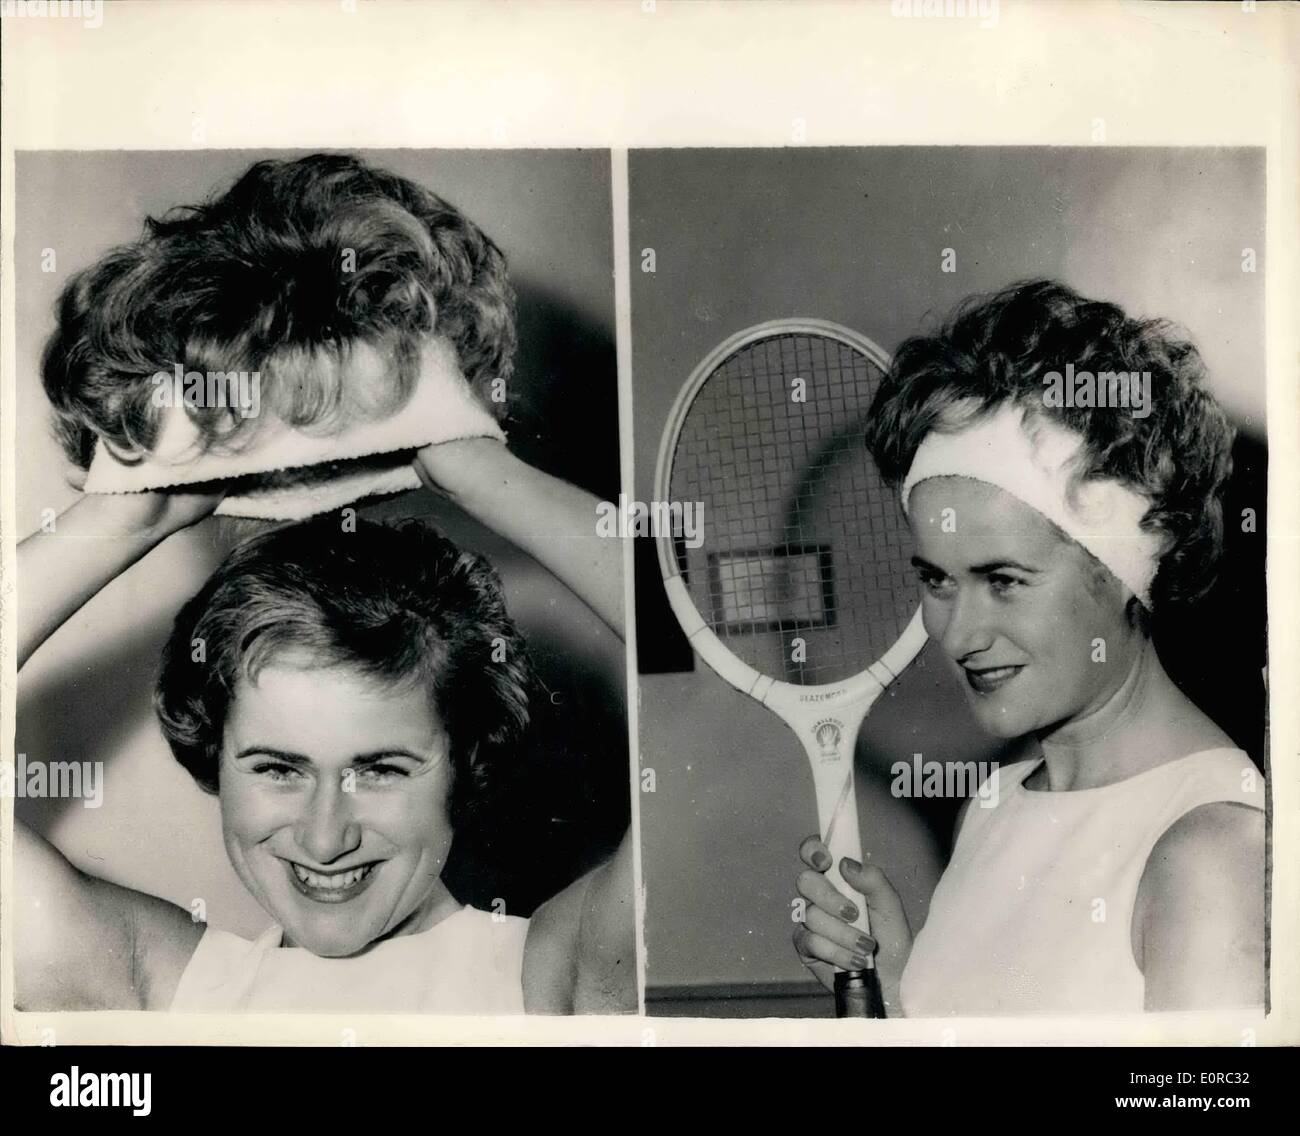 Jan. 01, 1959 - new styles by teddy Tinling on show on London. Shirley Bloomer and the ''Sportsgirl wig''. New styles for tennis-players and after -dark, created by Teddy Tinling - were shown in London today. Photo shows on left, Tennis star Shirley Bloomer shows how to don the new ''Sportgirl Wig'', created for Tinling by French of London. The wig weighs only two ounces -is produced in any colour and is attached to washable terry towelling bandeu which will absorb any perspiration and protect make-up while in play. On right Shirley is seen wearing the new ''Sportsgirl Wig' Stock Photo